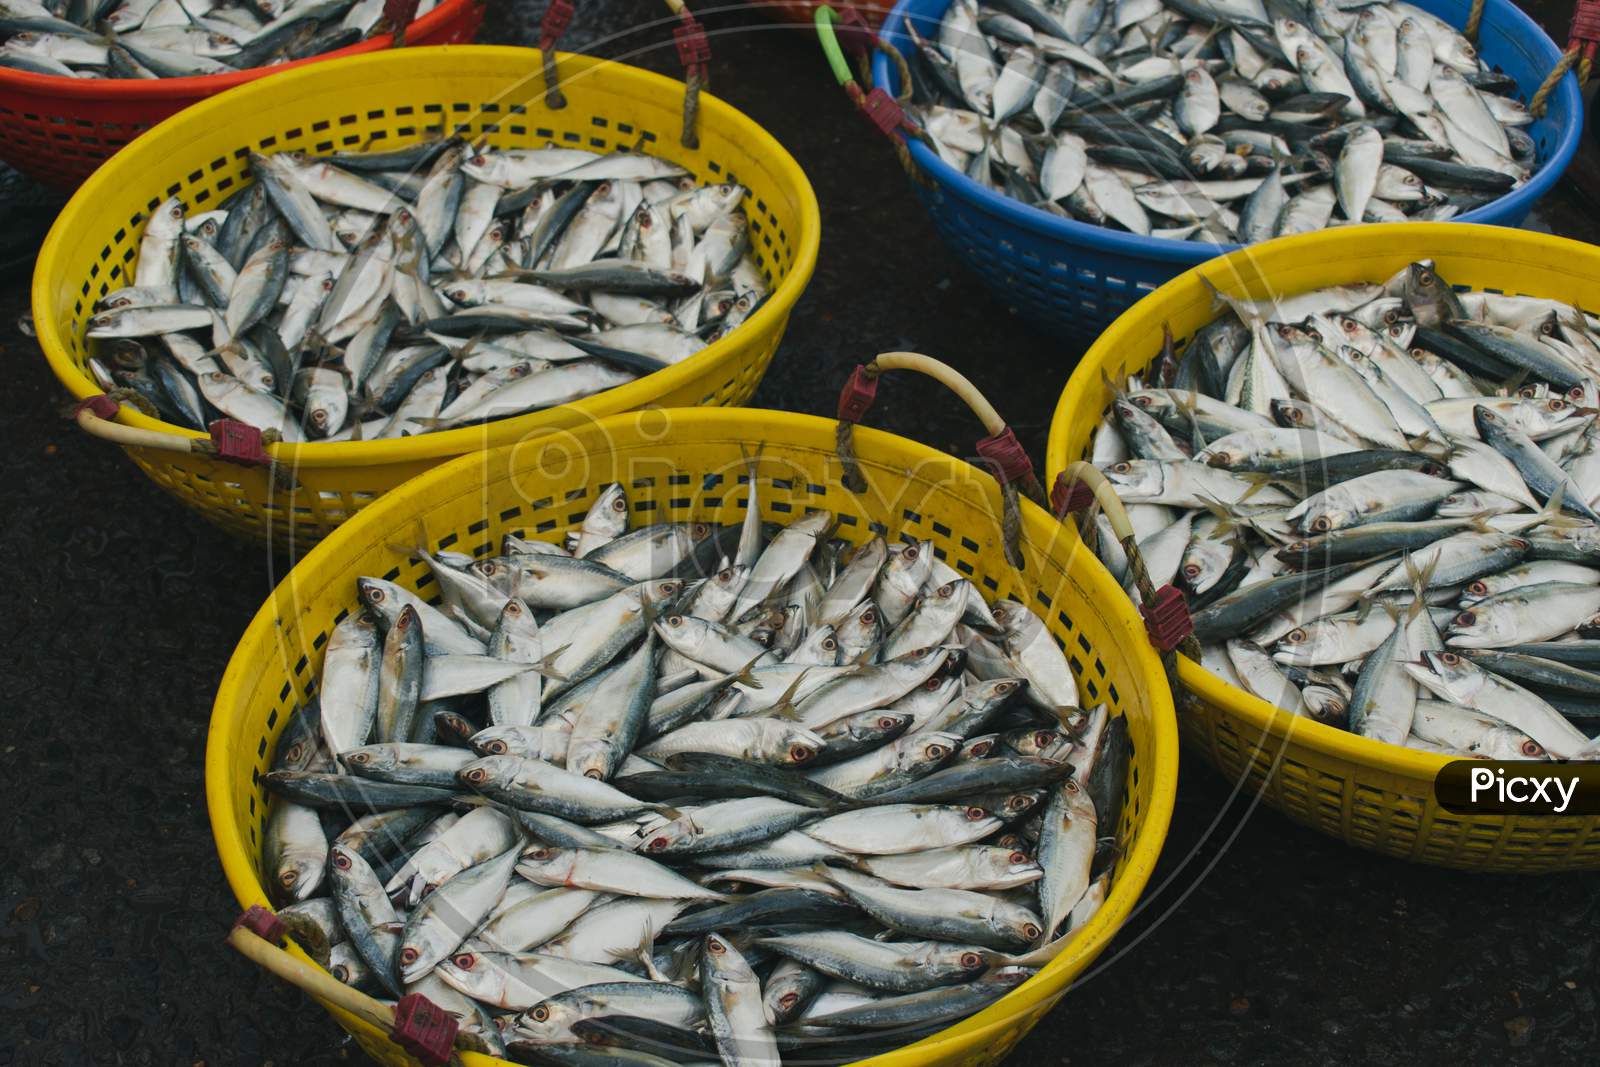 Collection Of Indian Mackerel In A Fish Containers For Sale In The Market.